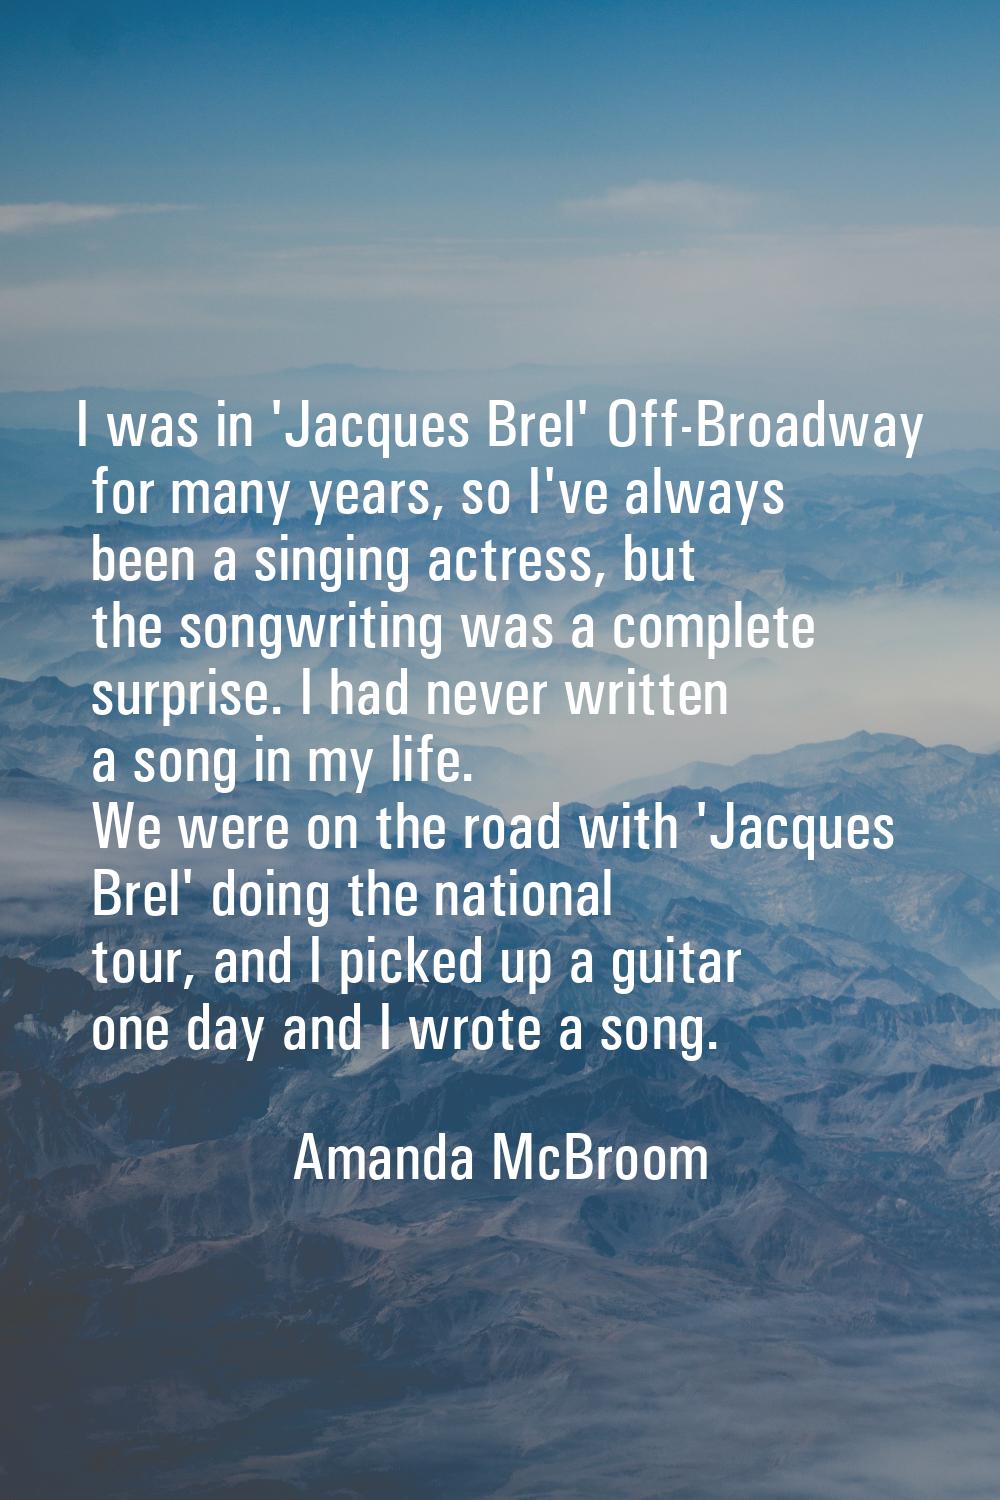 I was in 'Jacques Brel' Off-Broadway for many years, so I've always been a singing actress, but the